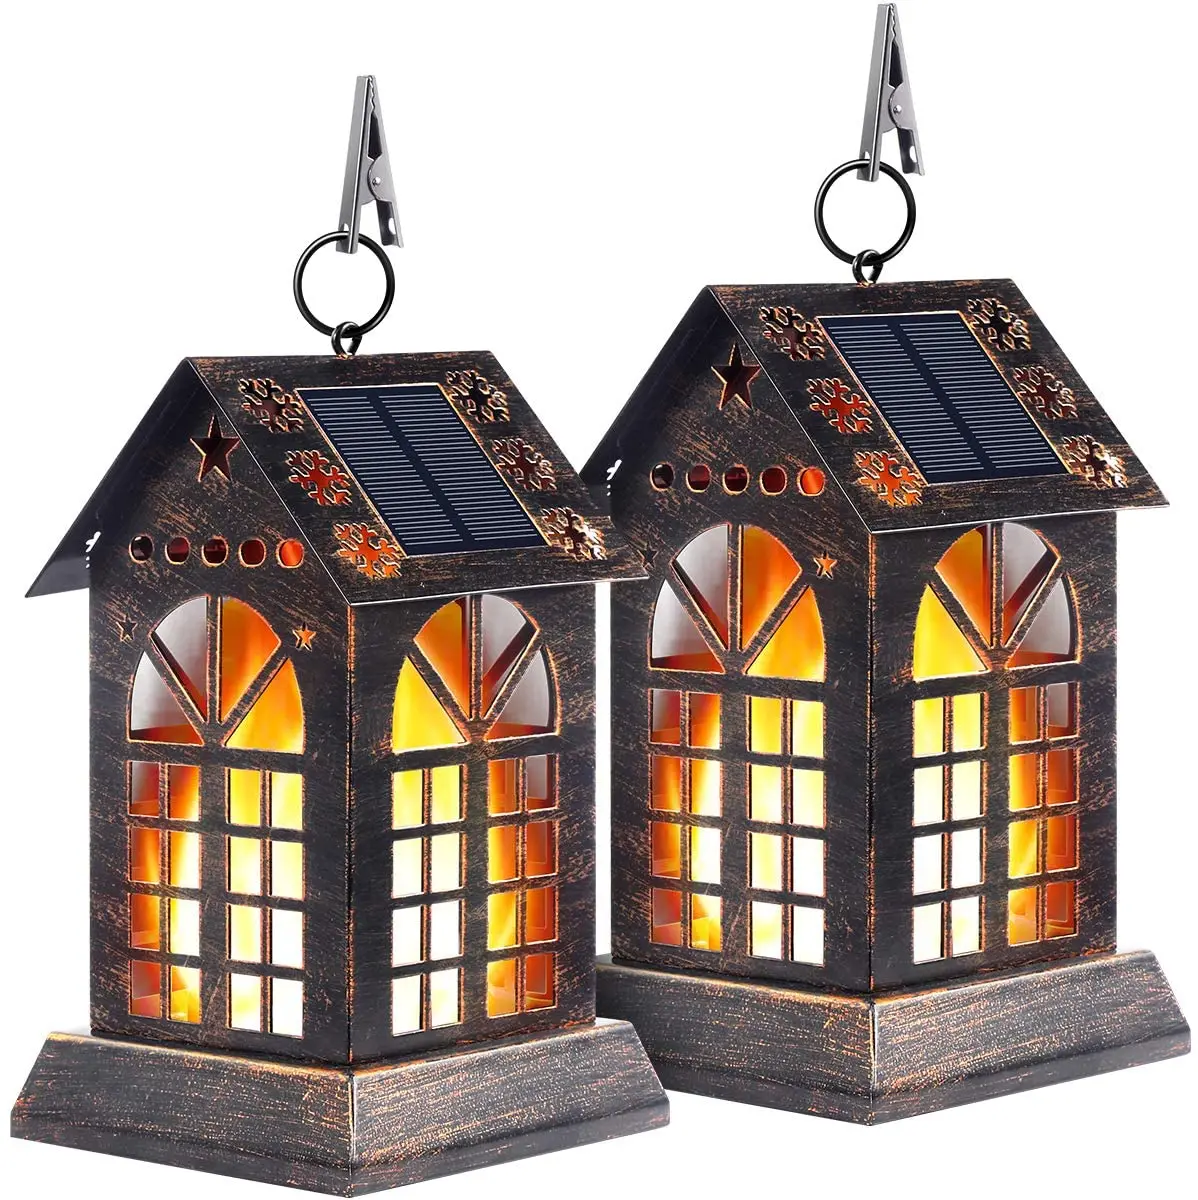 2 Pack Dancing Flame Waterproof Outdoor Hanging Lanterns Solar Powered Umbrella LED Night Light Dusk to Dawn Auto On/Off Landscape Decorative for Garden Patio Yard Path Walensee Solar Lantern Lights 